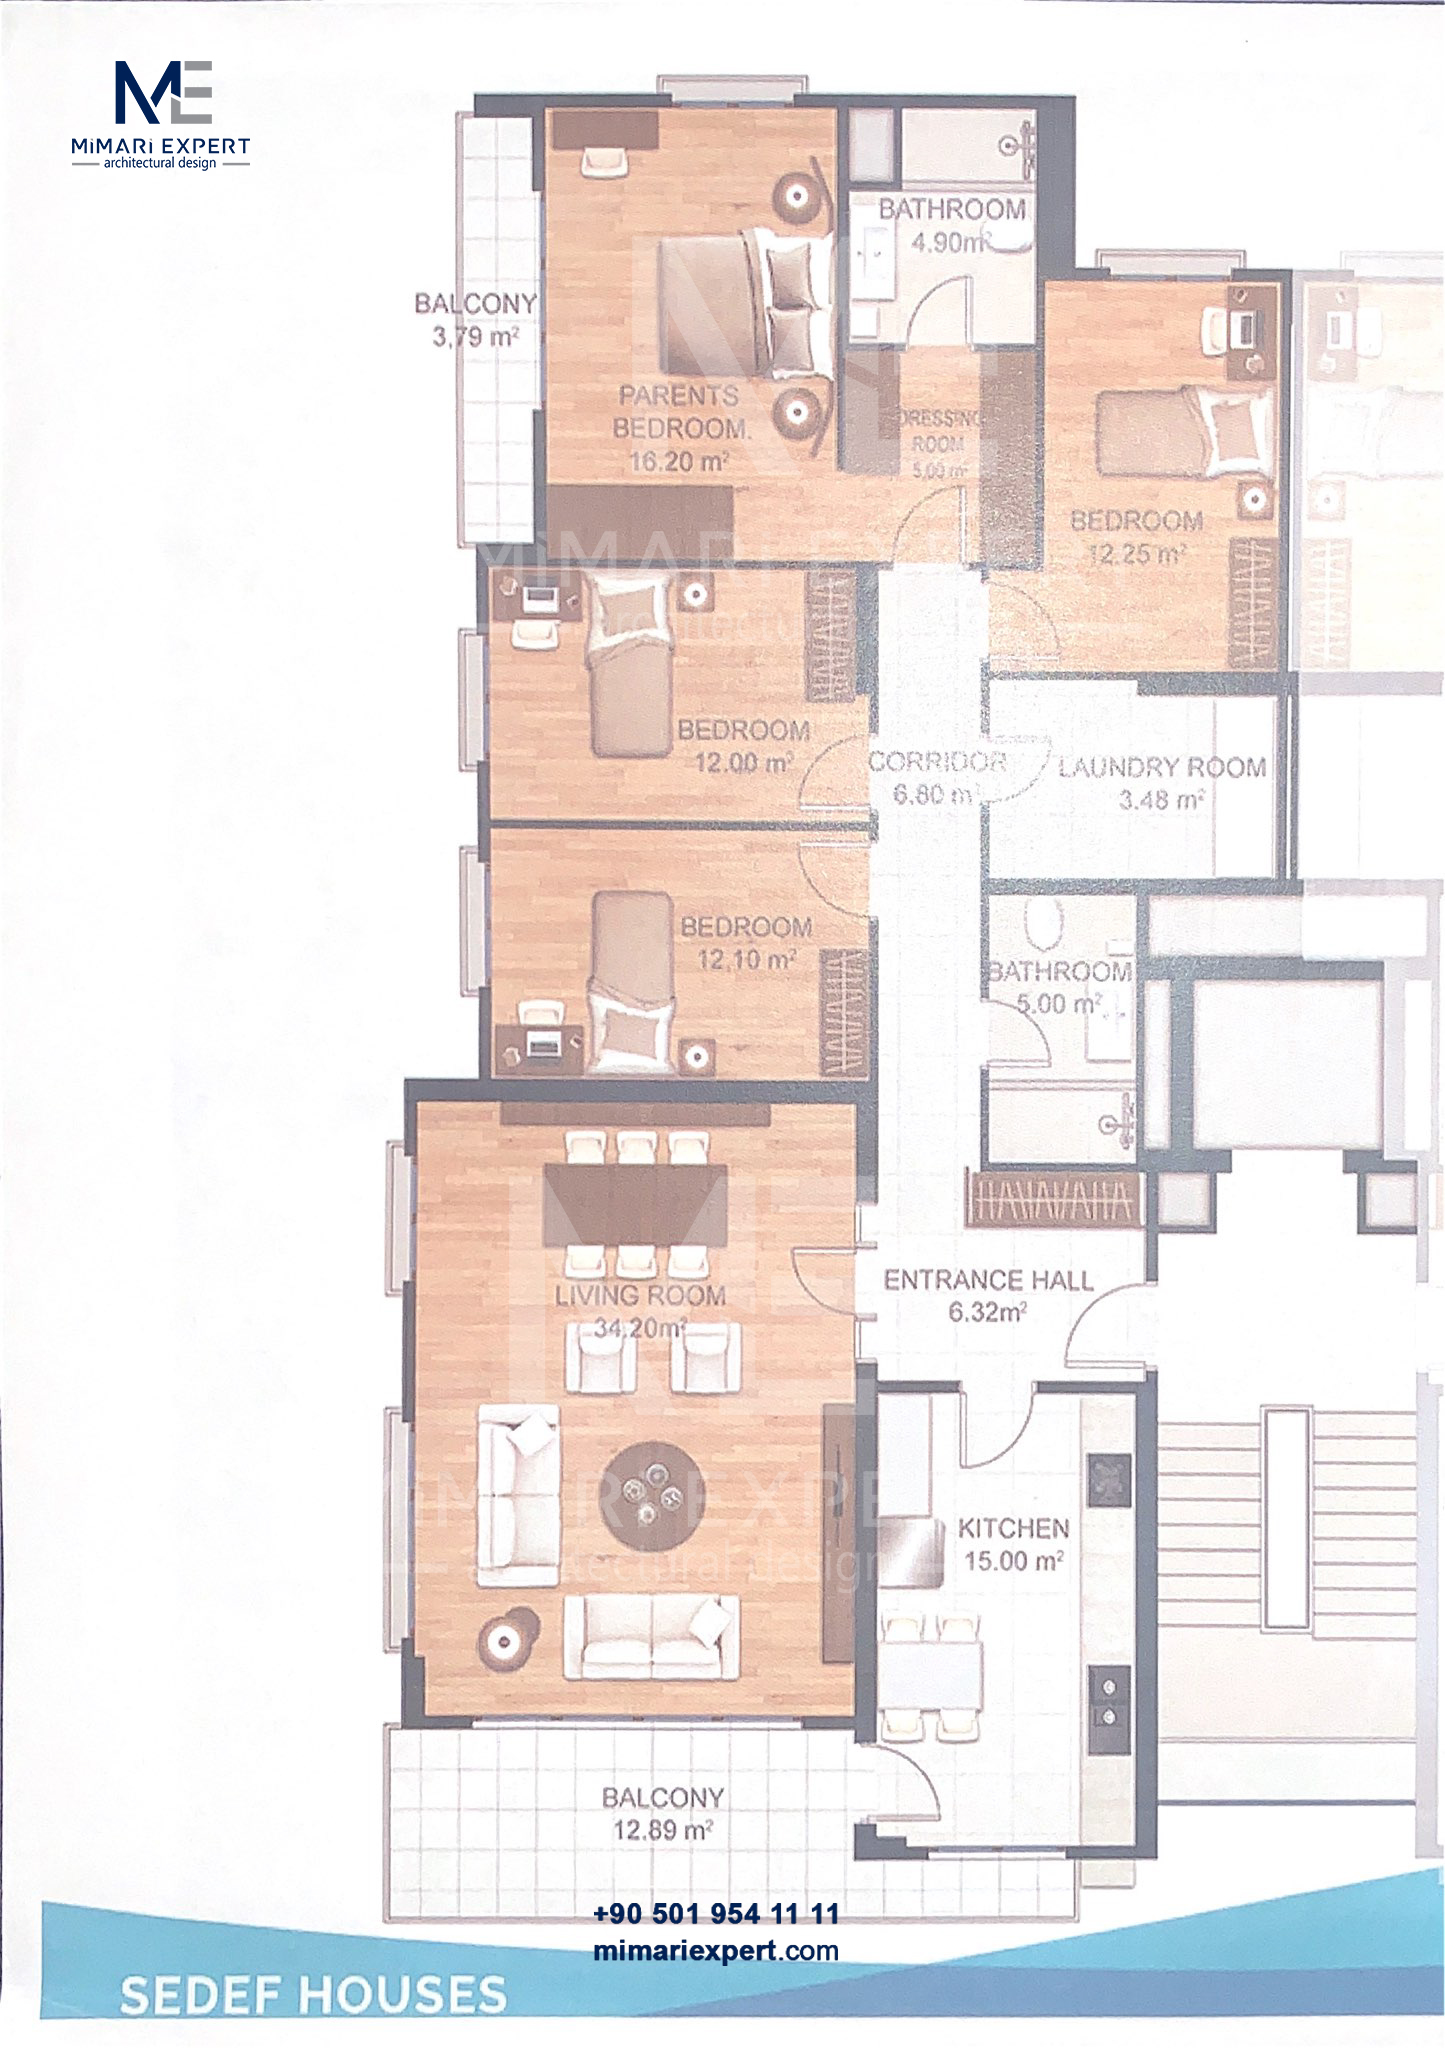 Image from the Plan